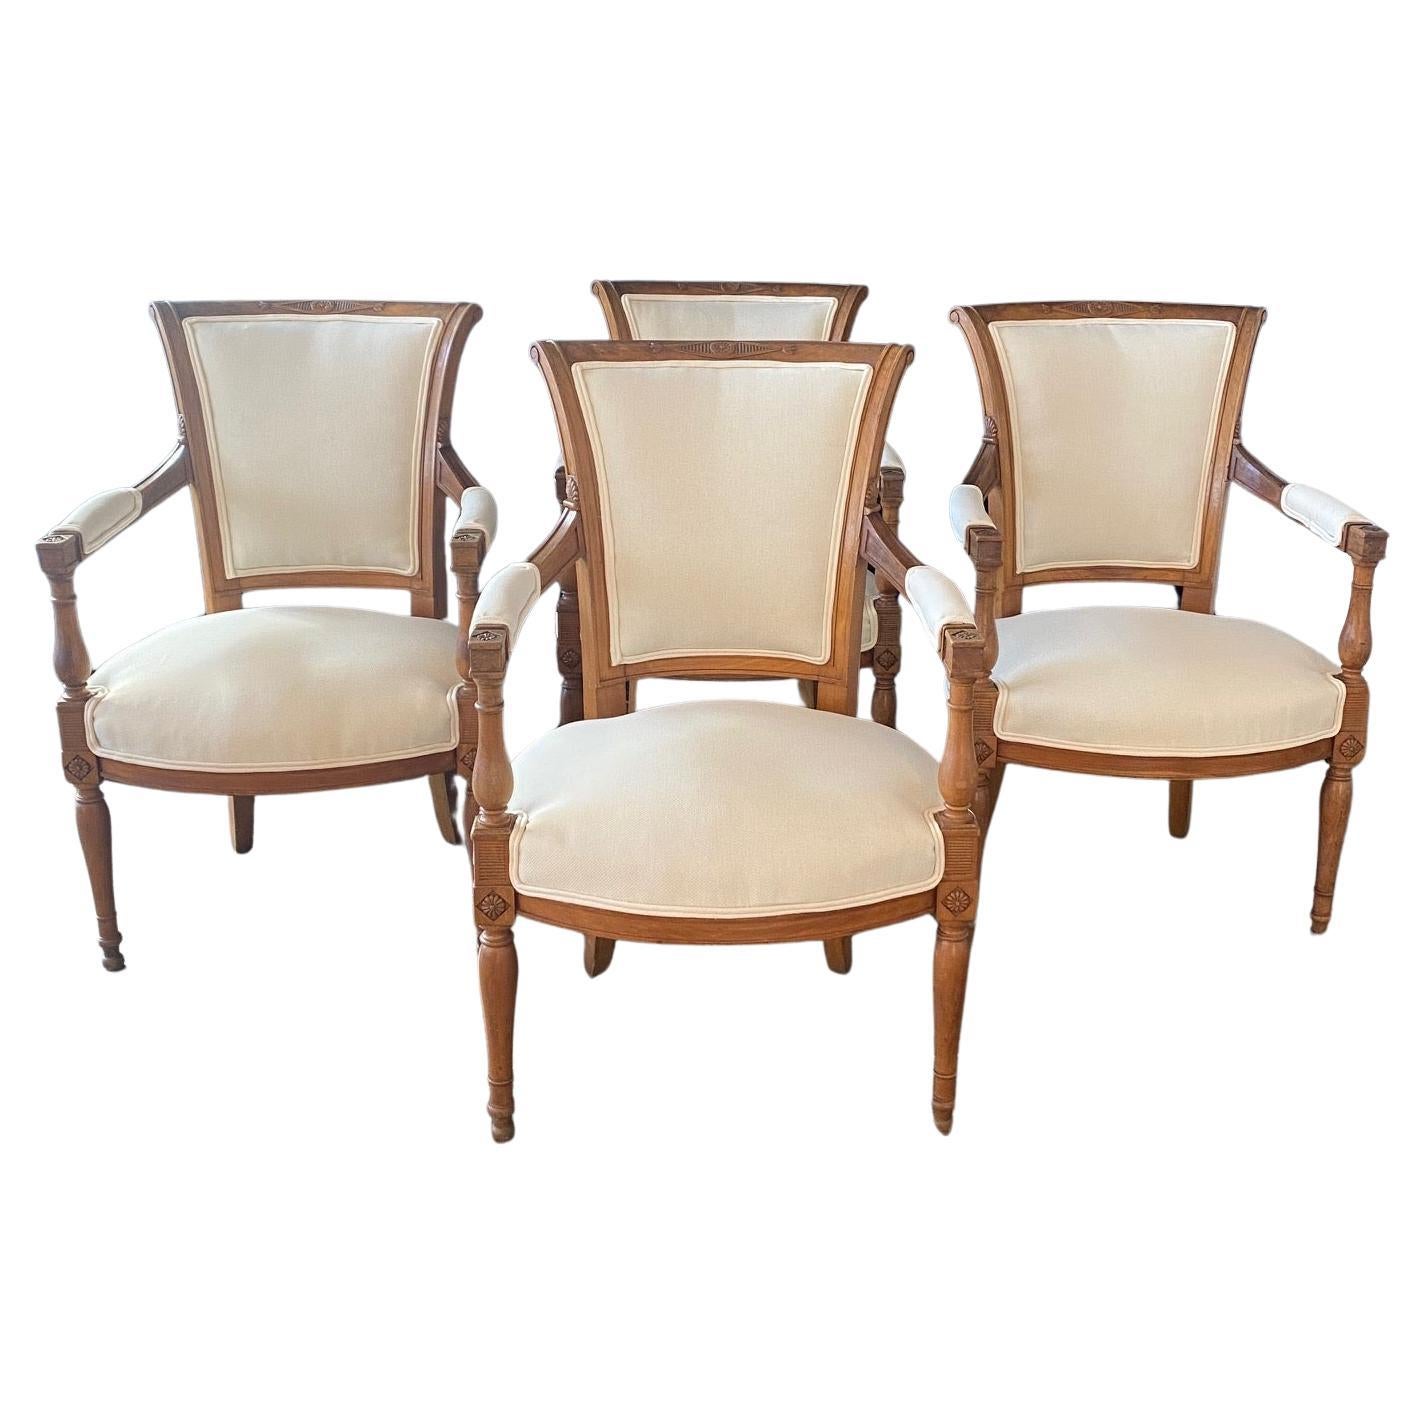 Set of Four French Antique Neoclassical Finely Carved Directoire Dining Chairs For Sale